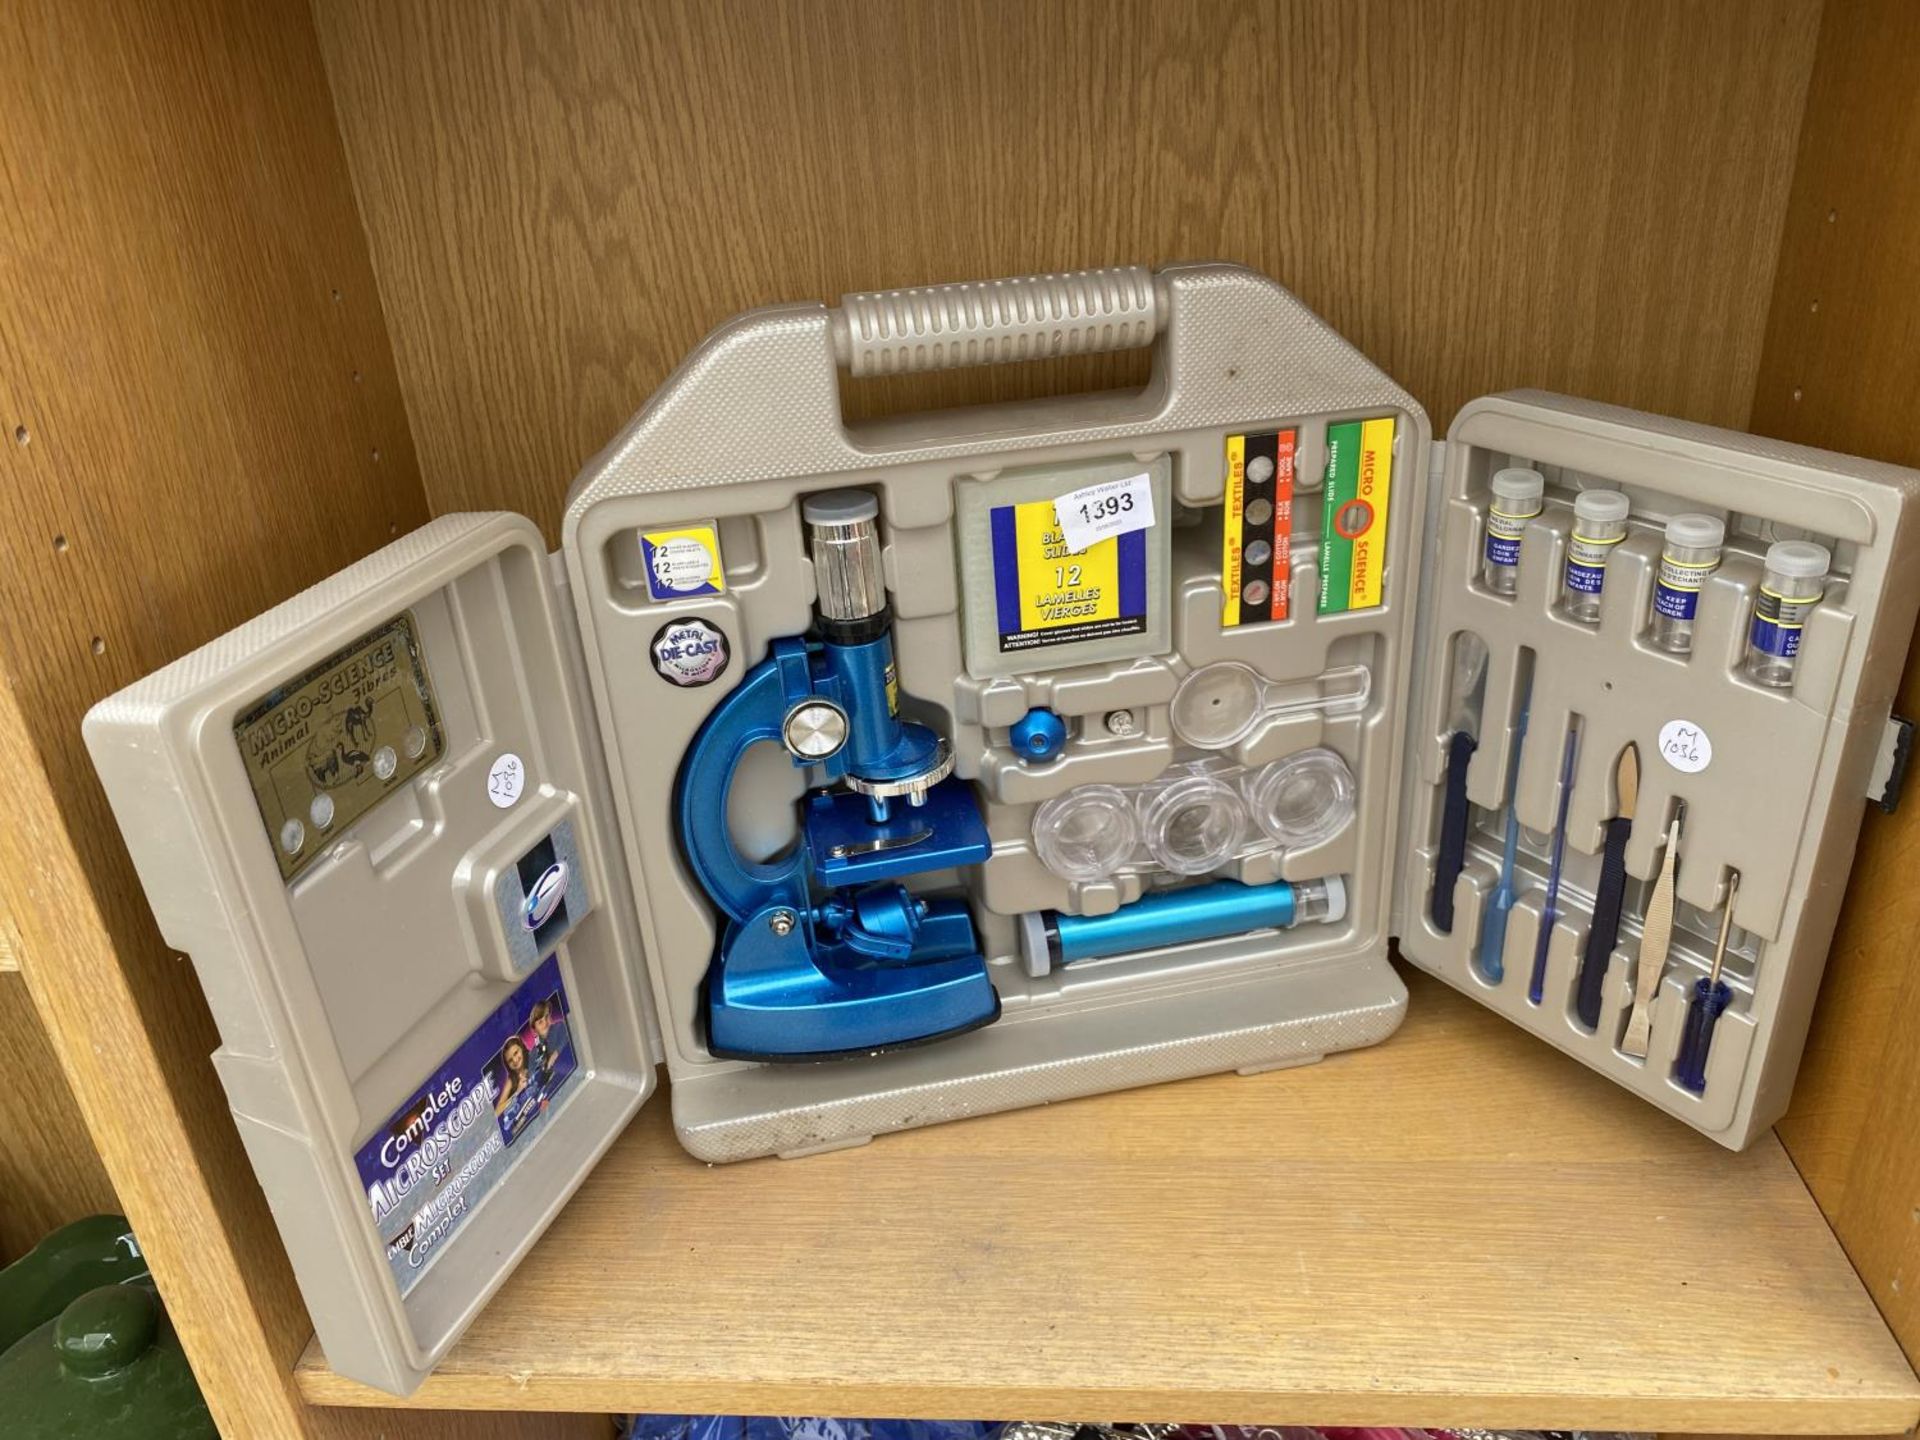 A COMPLETE MICROSCOPE SET